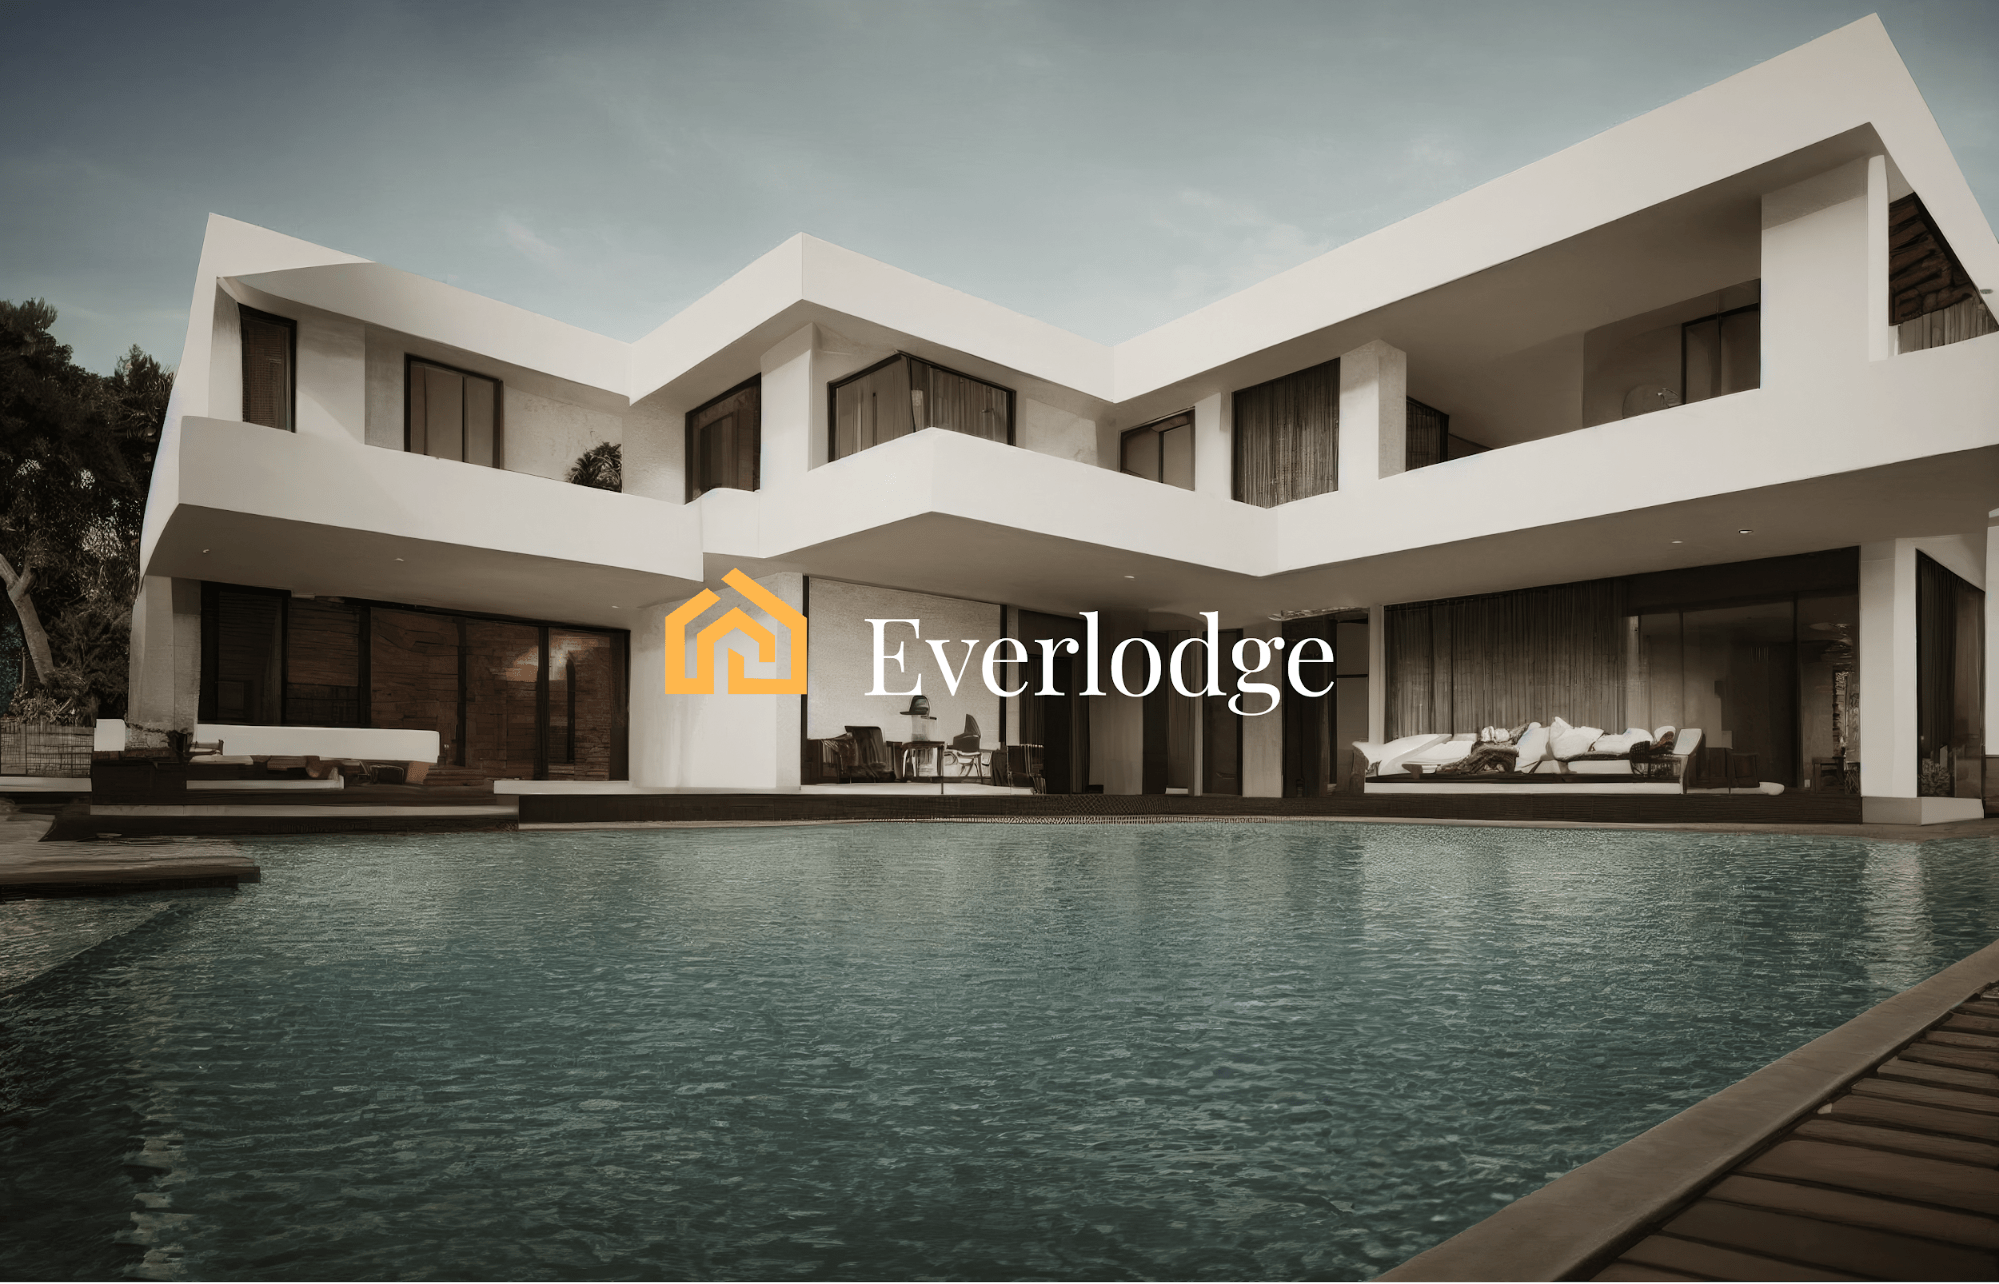 Everlodge (ELDG) Woos Investors with Passive Income and Luxe Getaways – The VR Soldier